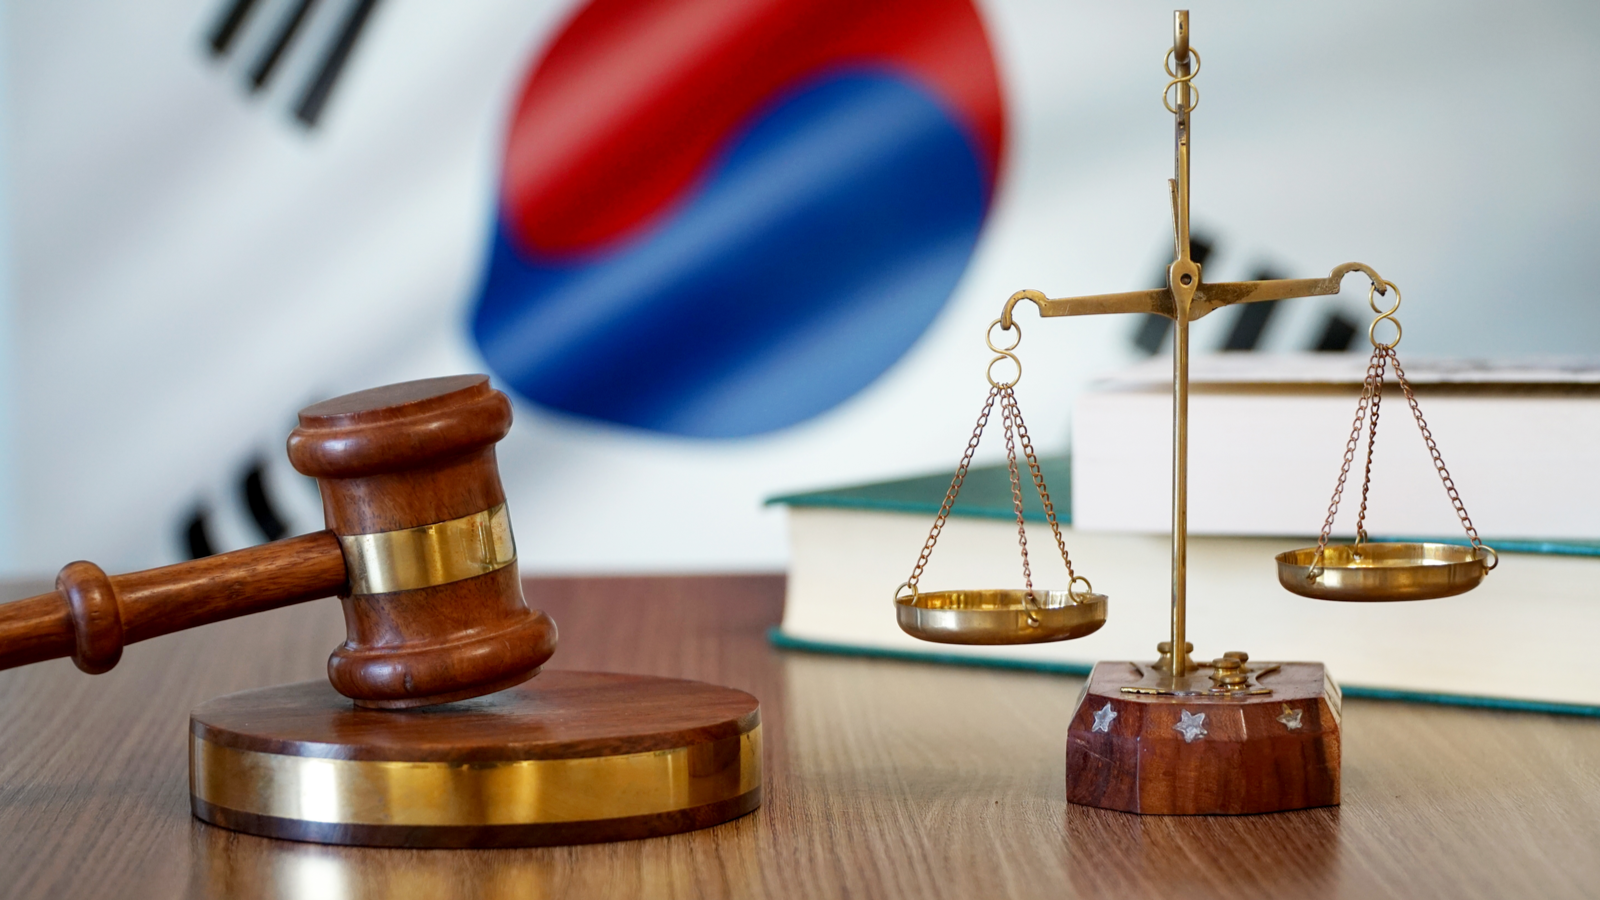 South Korea Enacts First Crypto Investor Protection Law, Bolstering Existing Rules